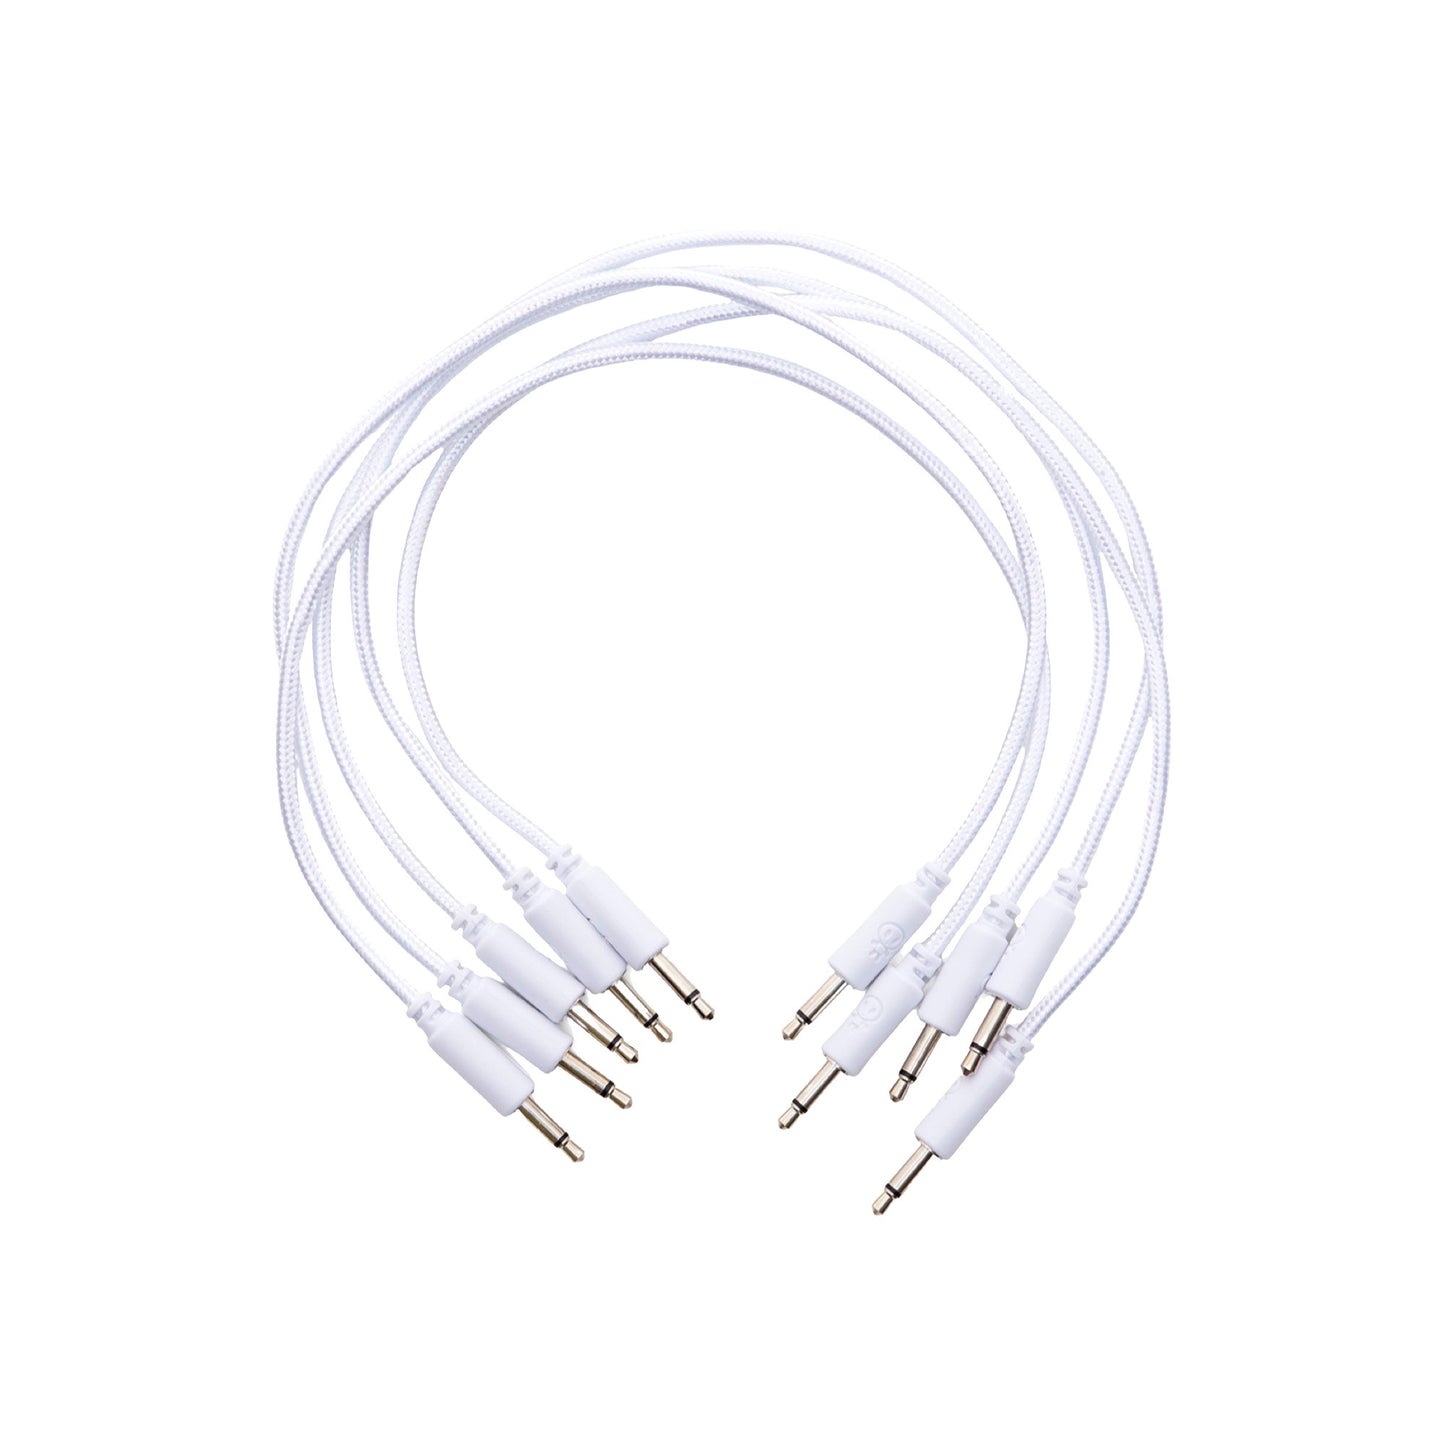 Braided Eurorack Patch Cables